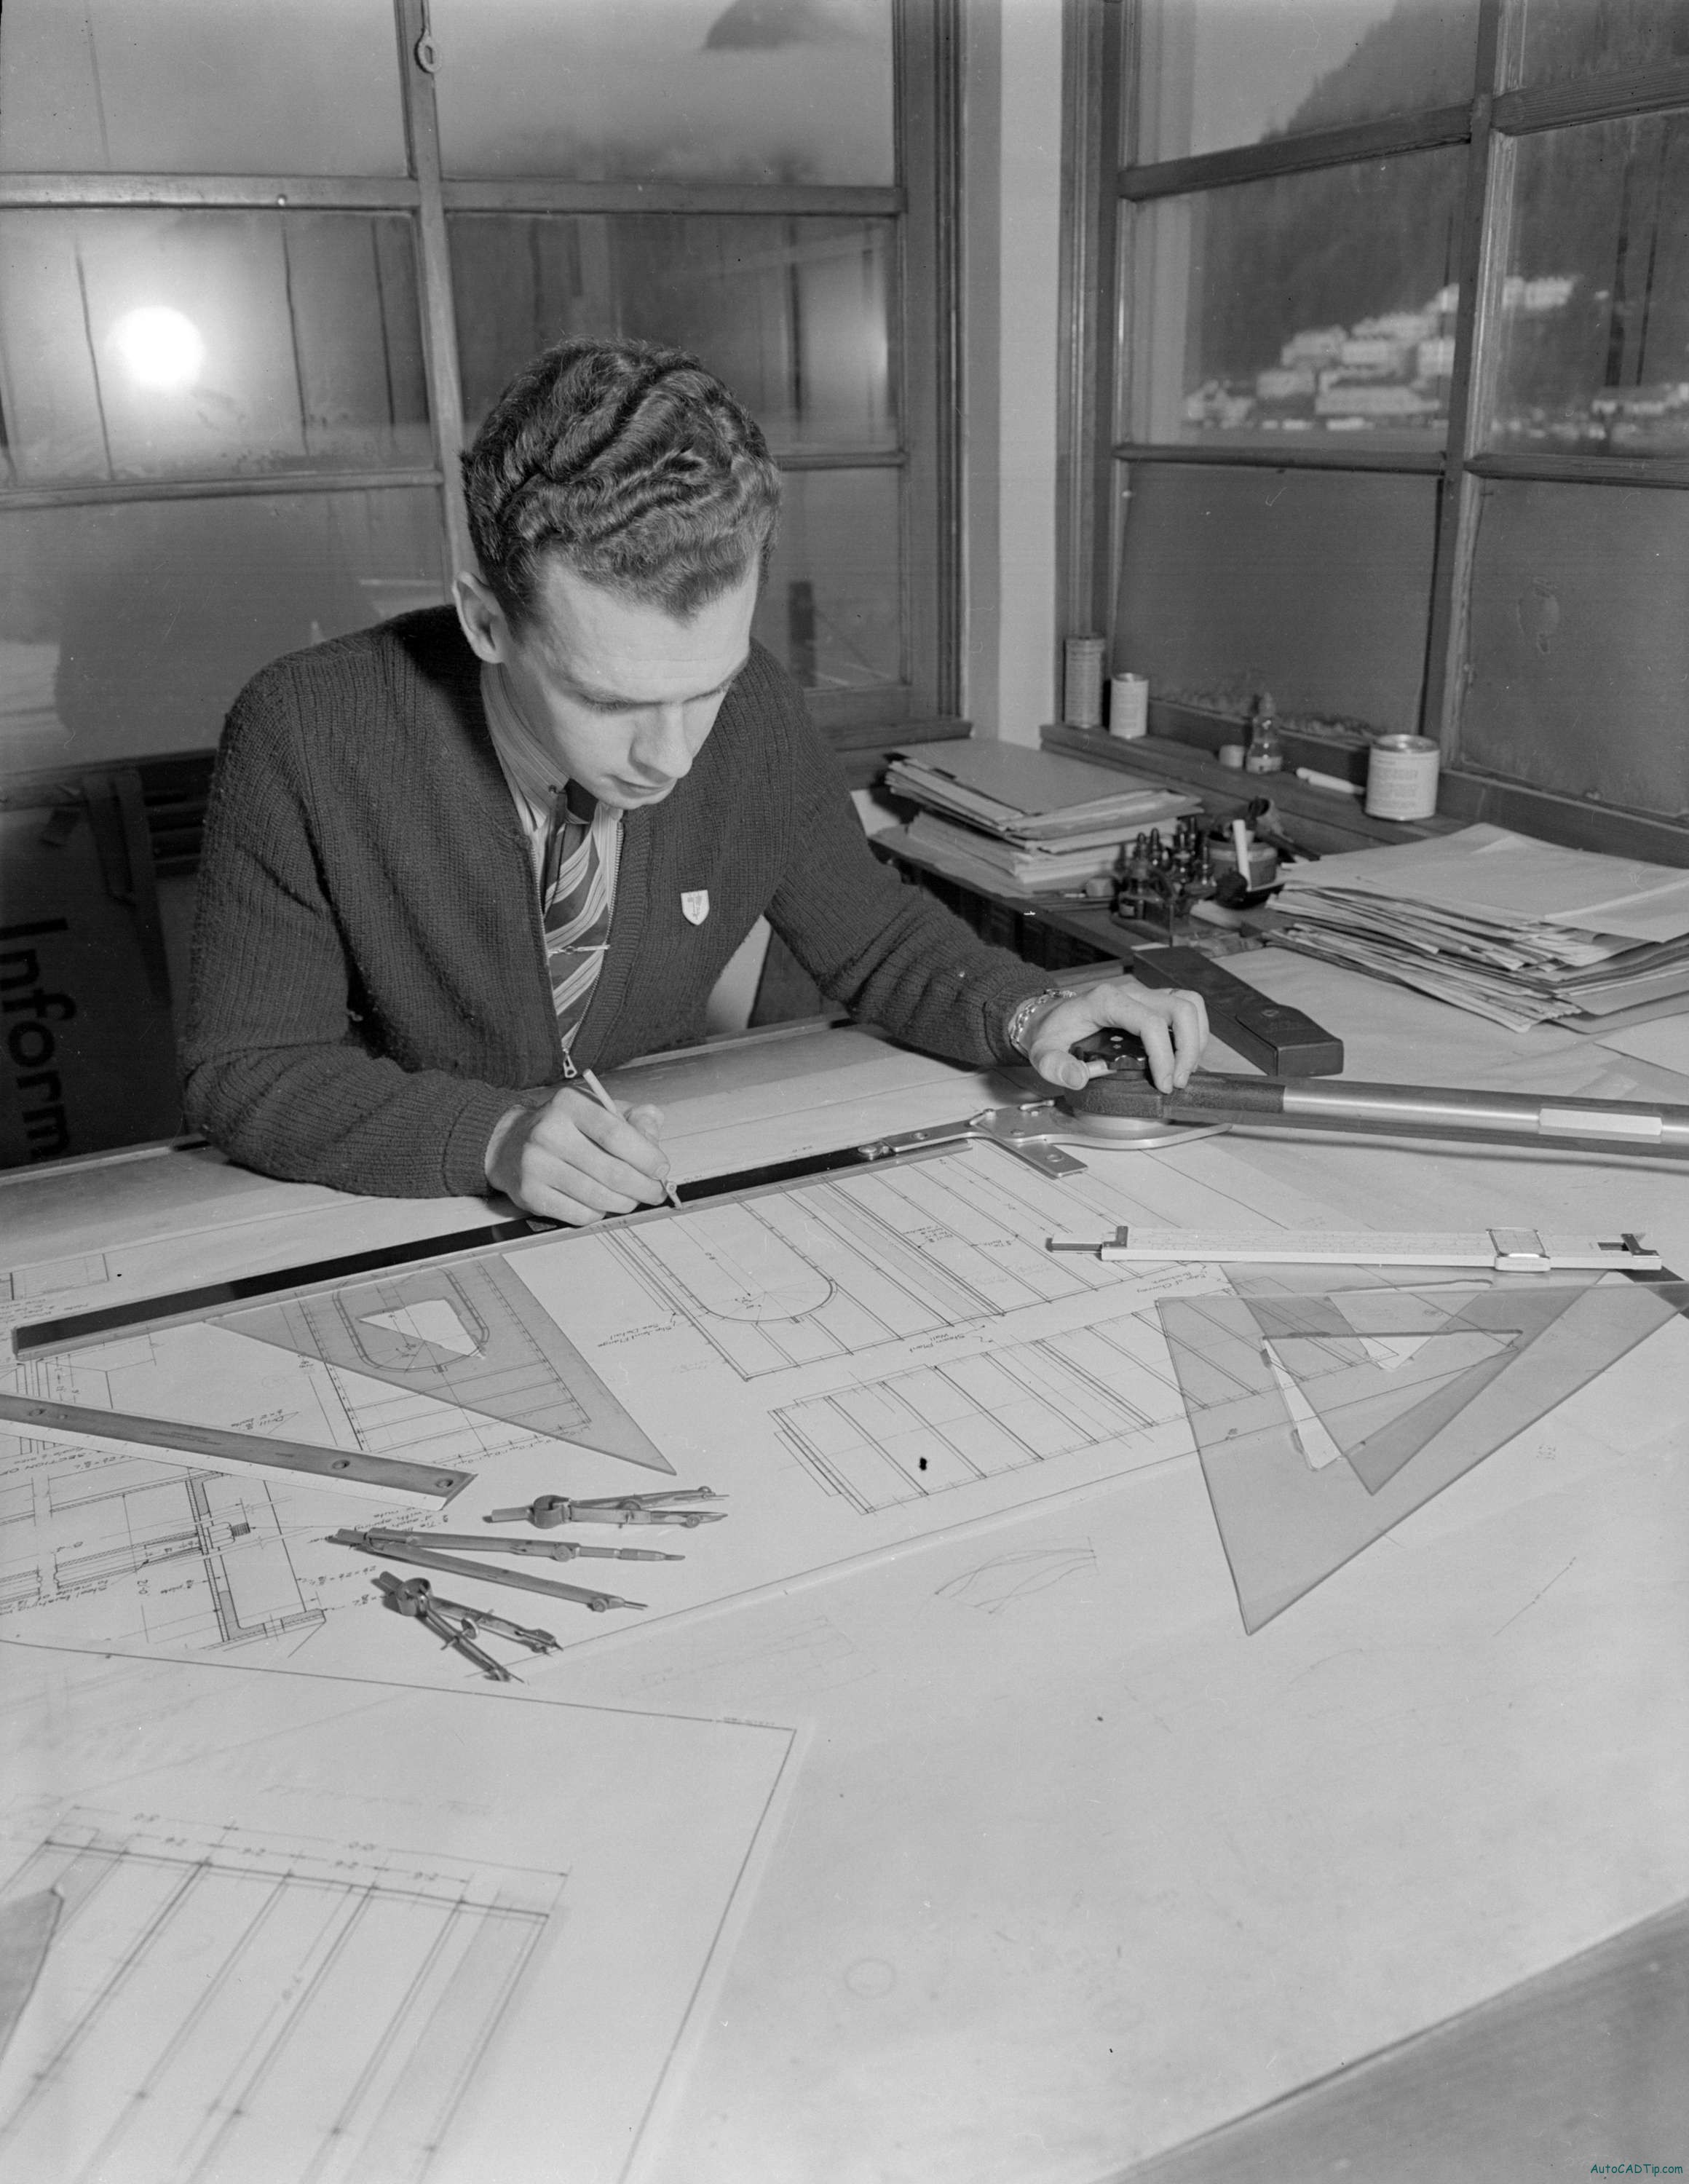 What is Architect and Draftsman?